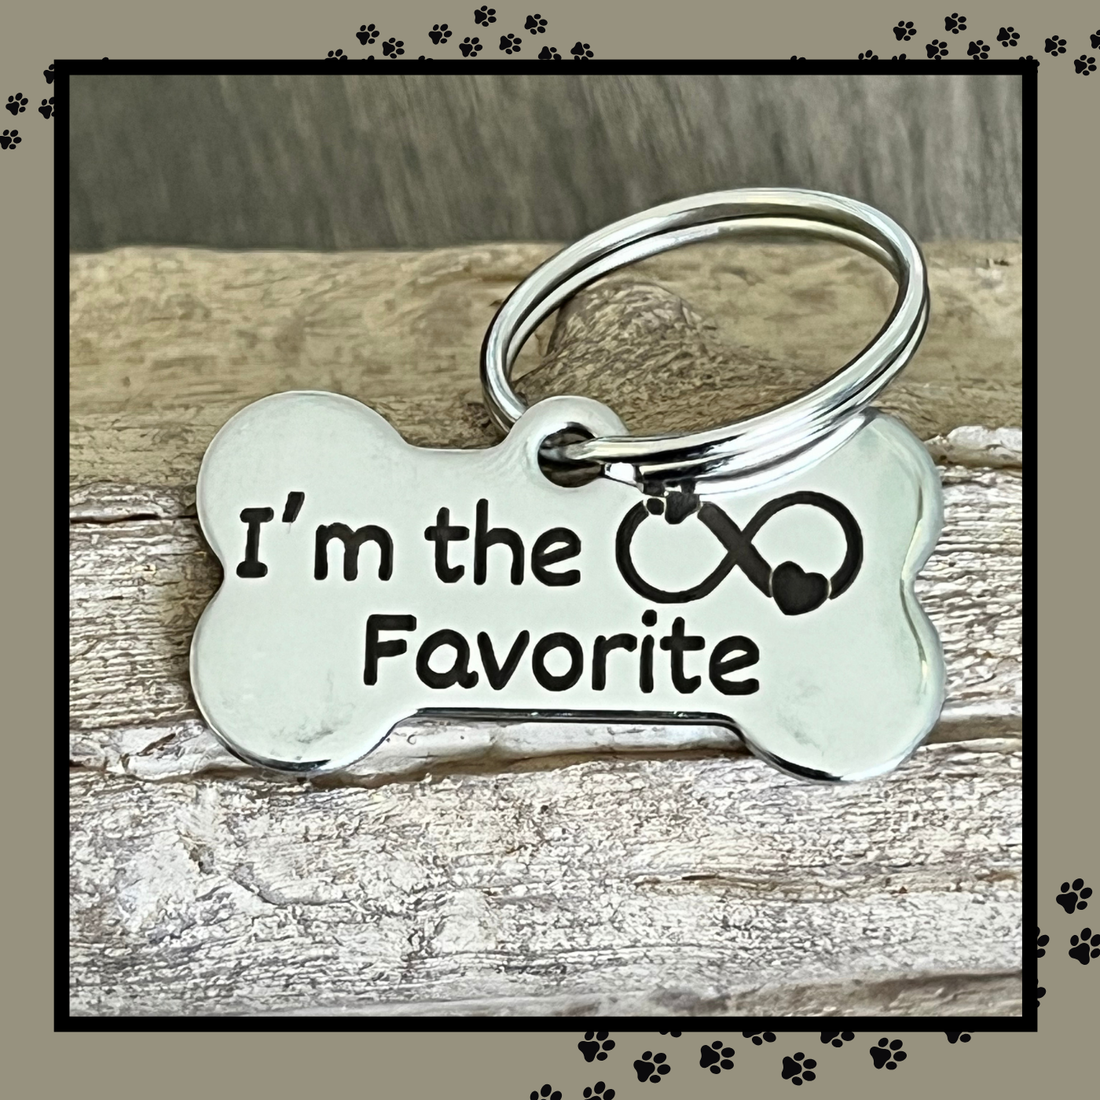 Deep engraved dog tag. Durable and personalized for lasting identification.